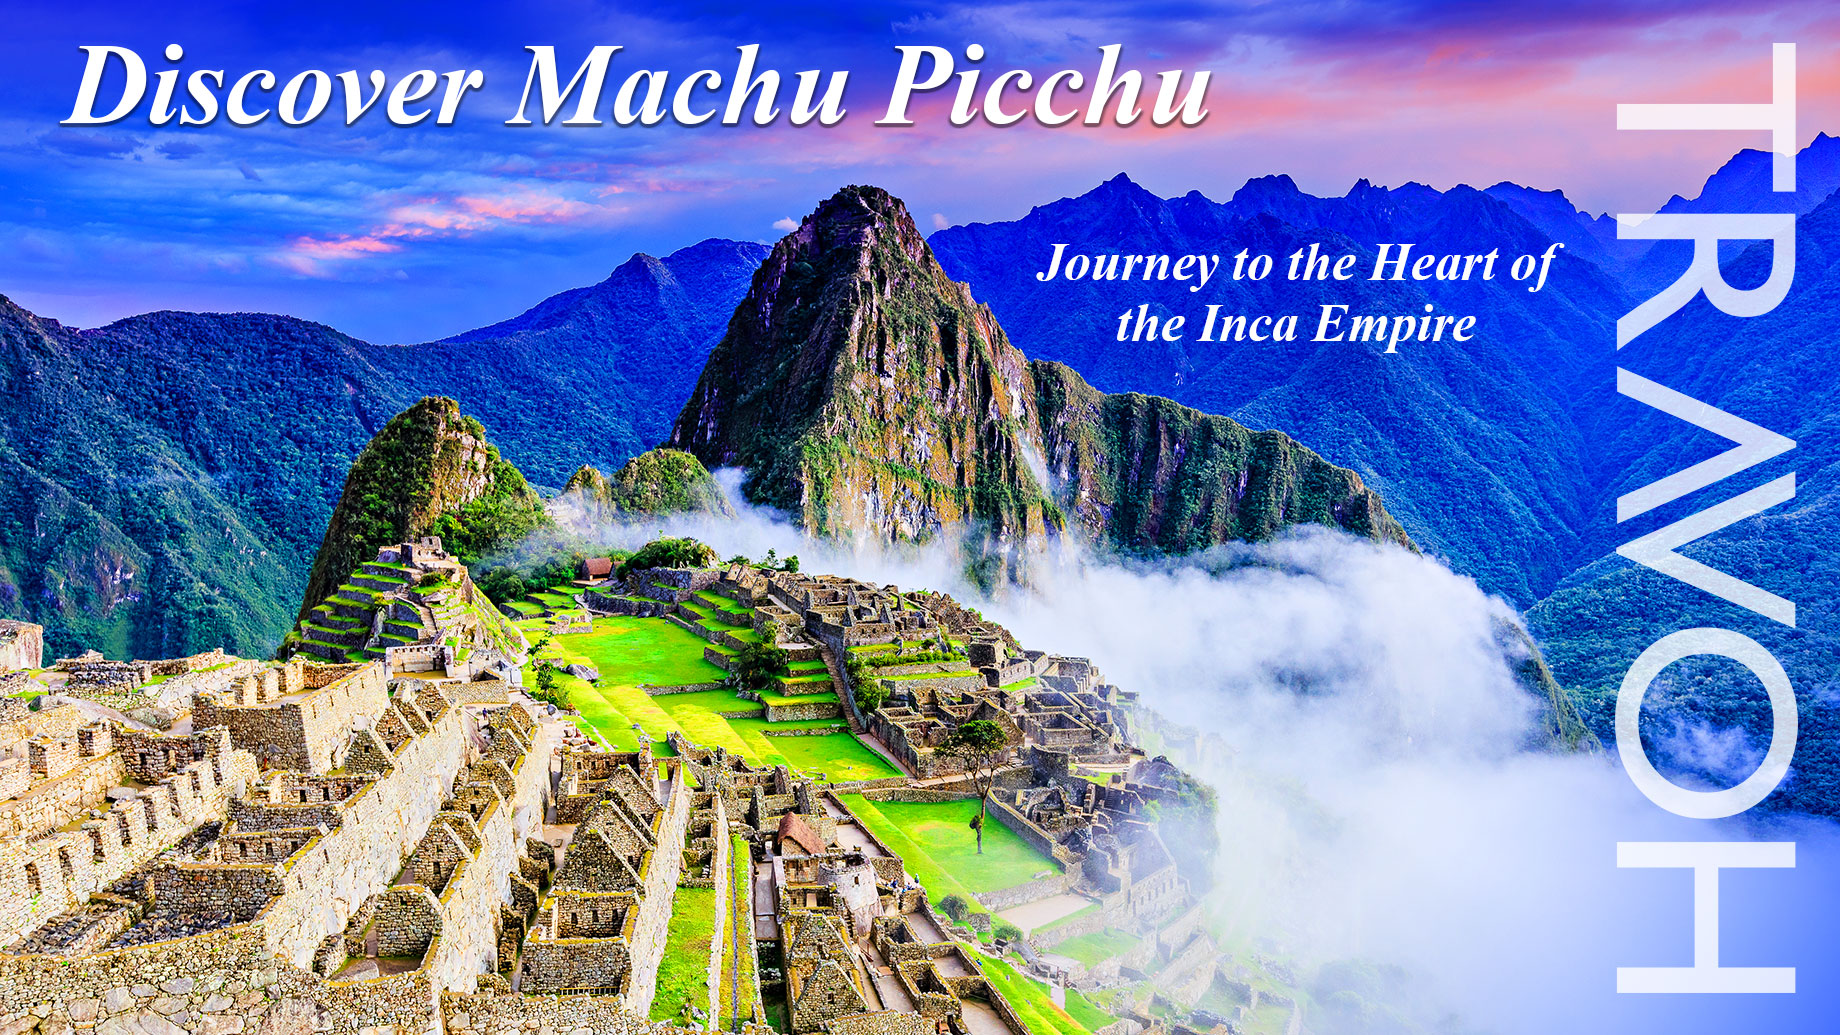 Discover Machu Picchu: Journey to the Heart of the Inca Empire